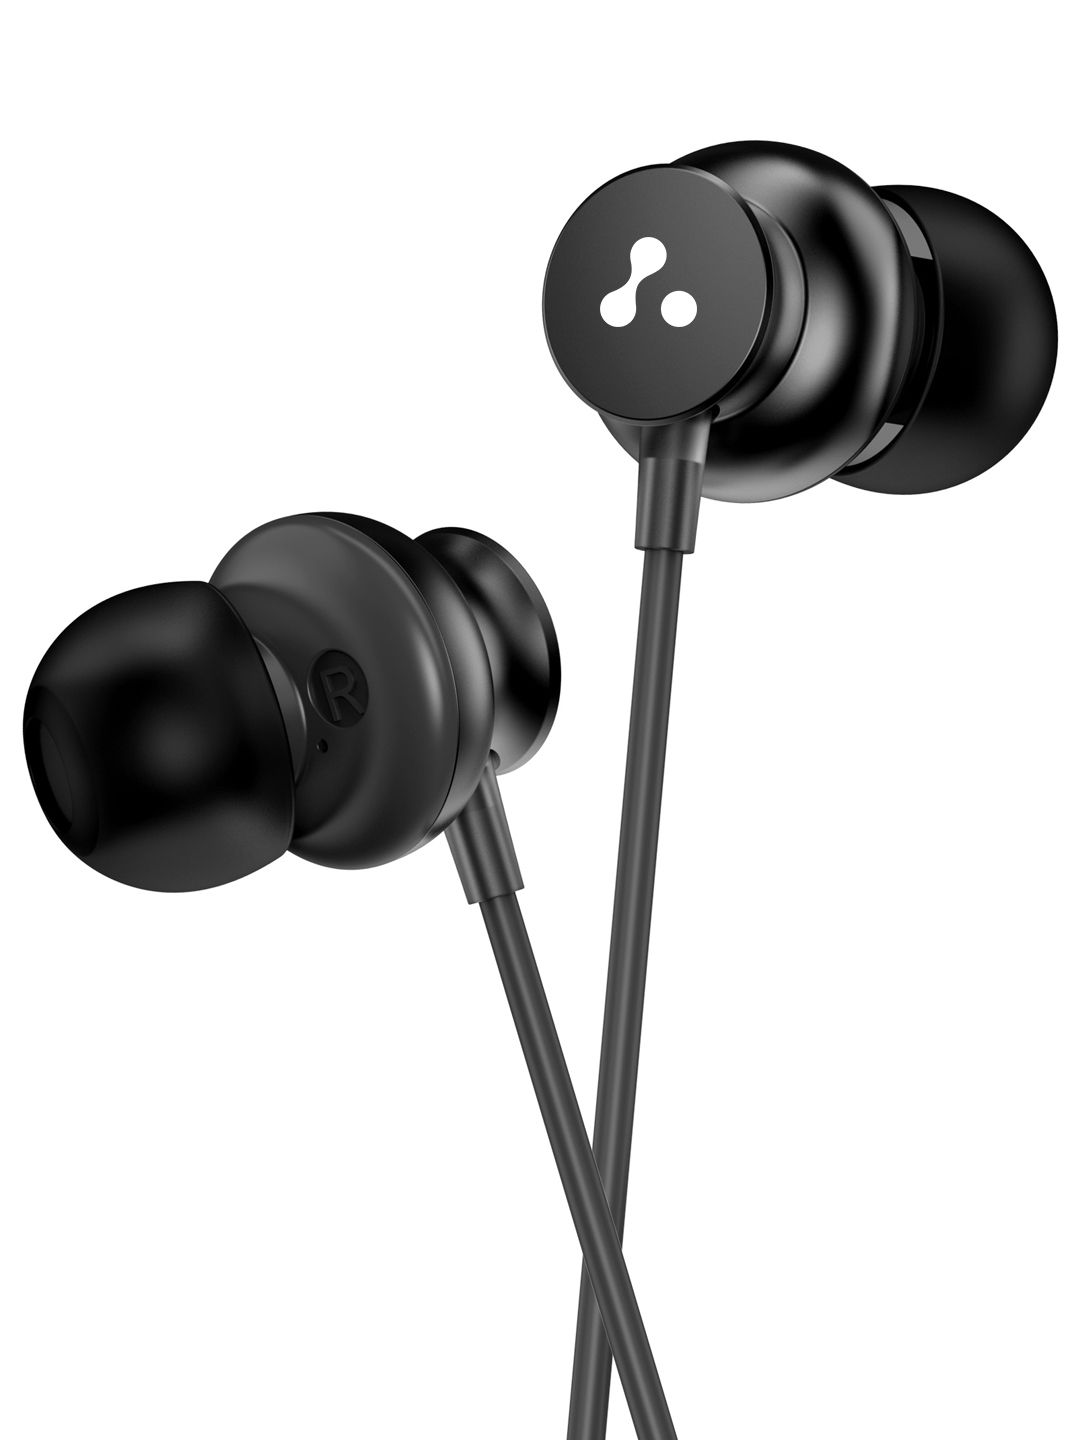 Ambrane Stringz 38 Wired Earphones with Mic & Powerful HD Sound with High Bass - Black Price in India